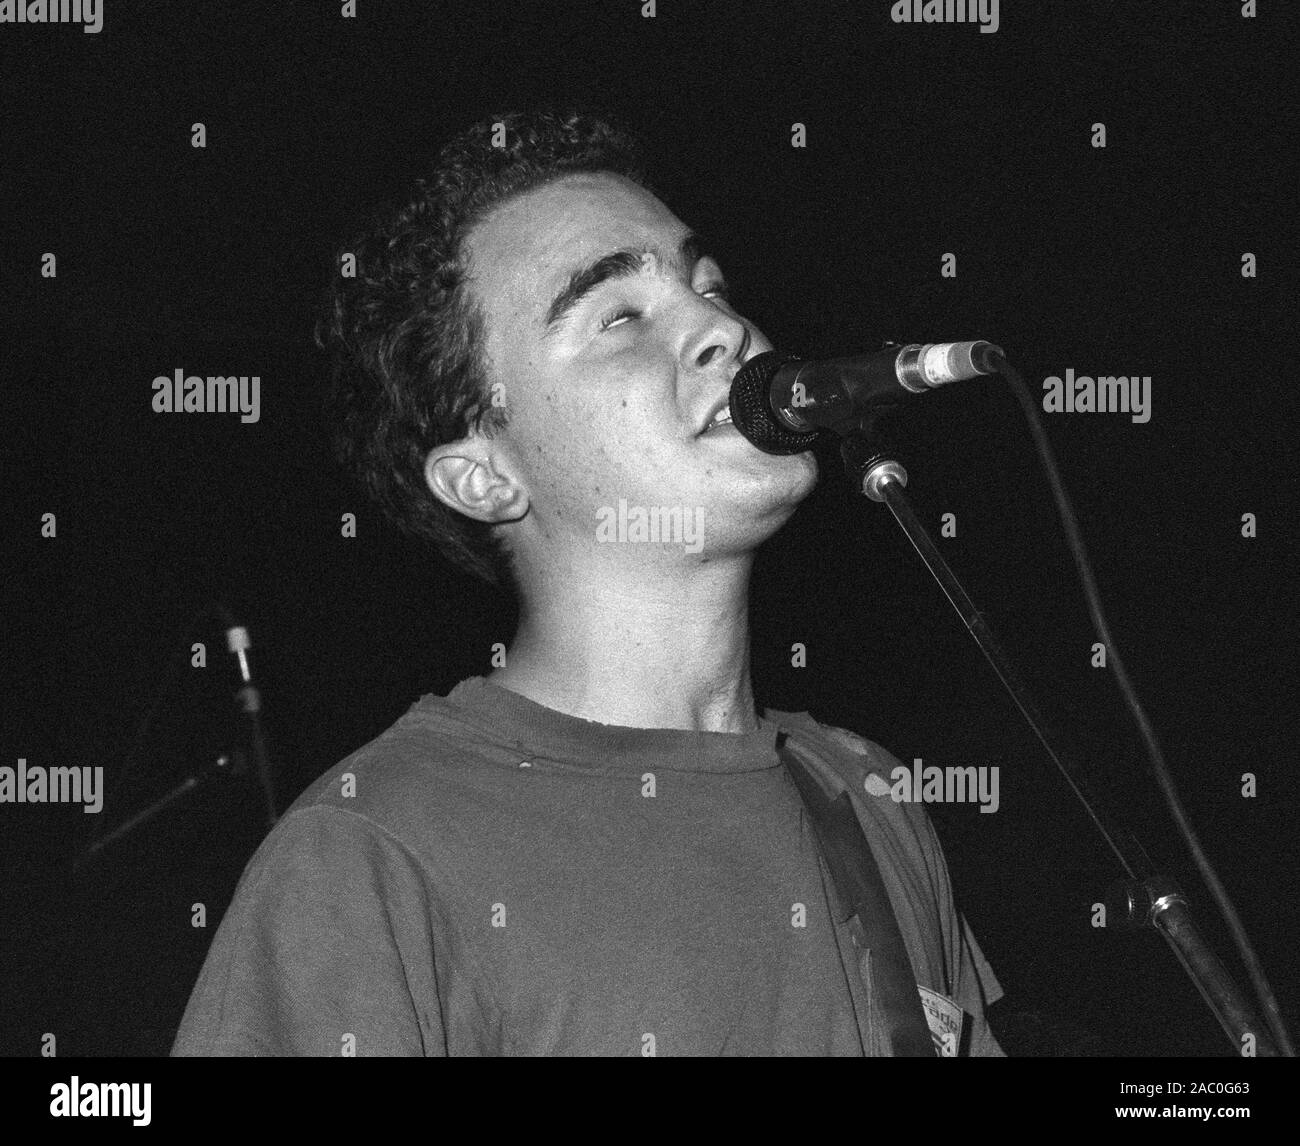 Mark Robinson of the American indie band Unrest performing at The Underworld, London, England, 11th September 1992. Stock Photo